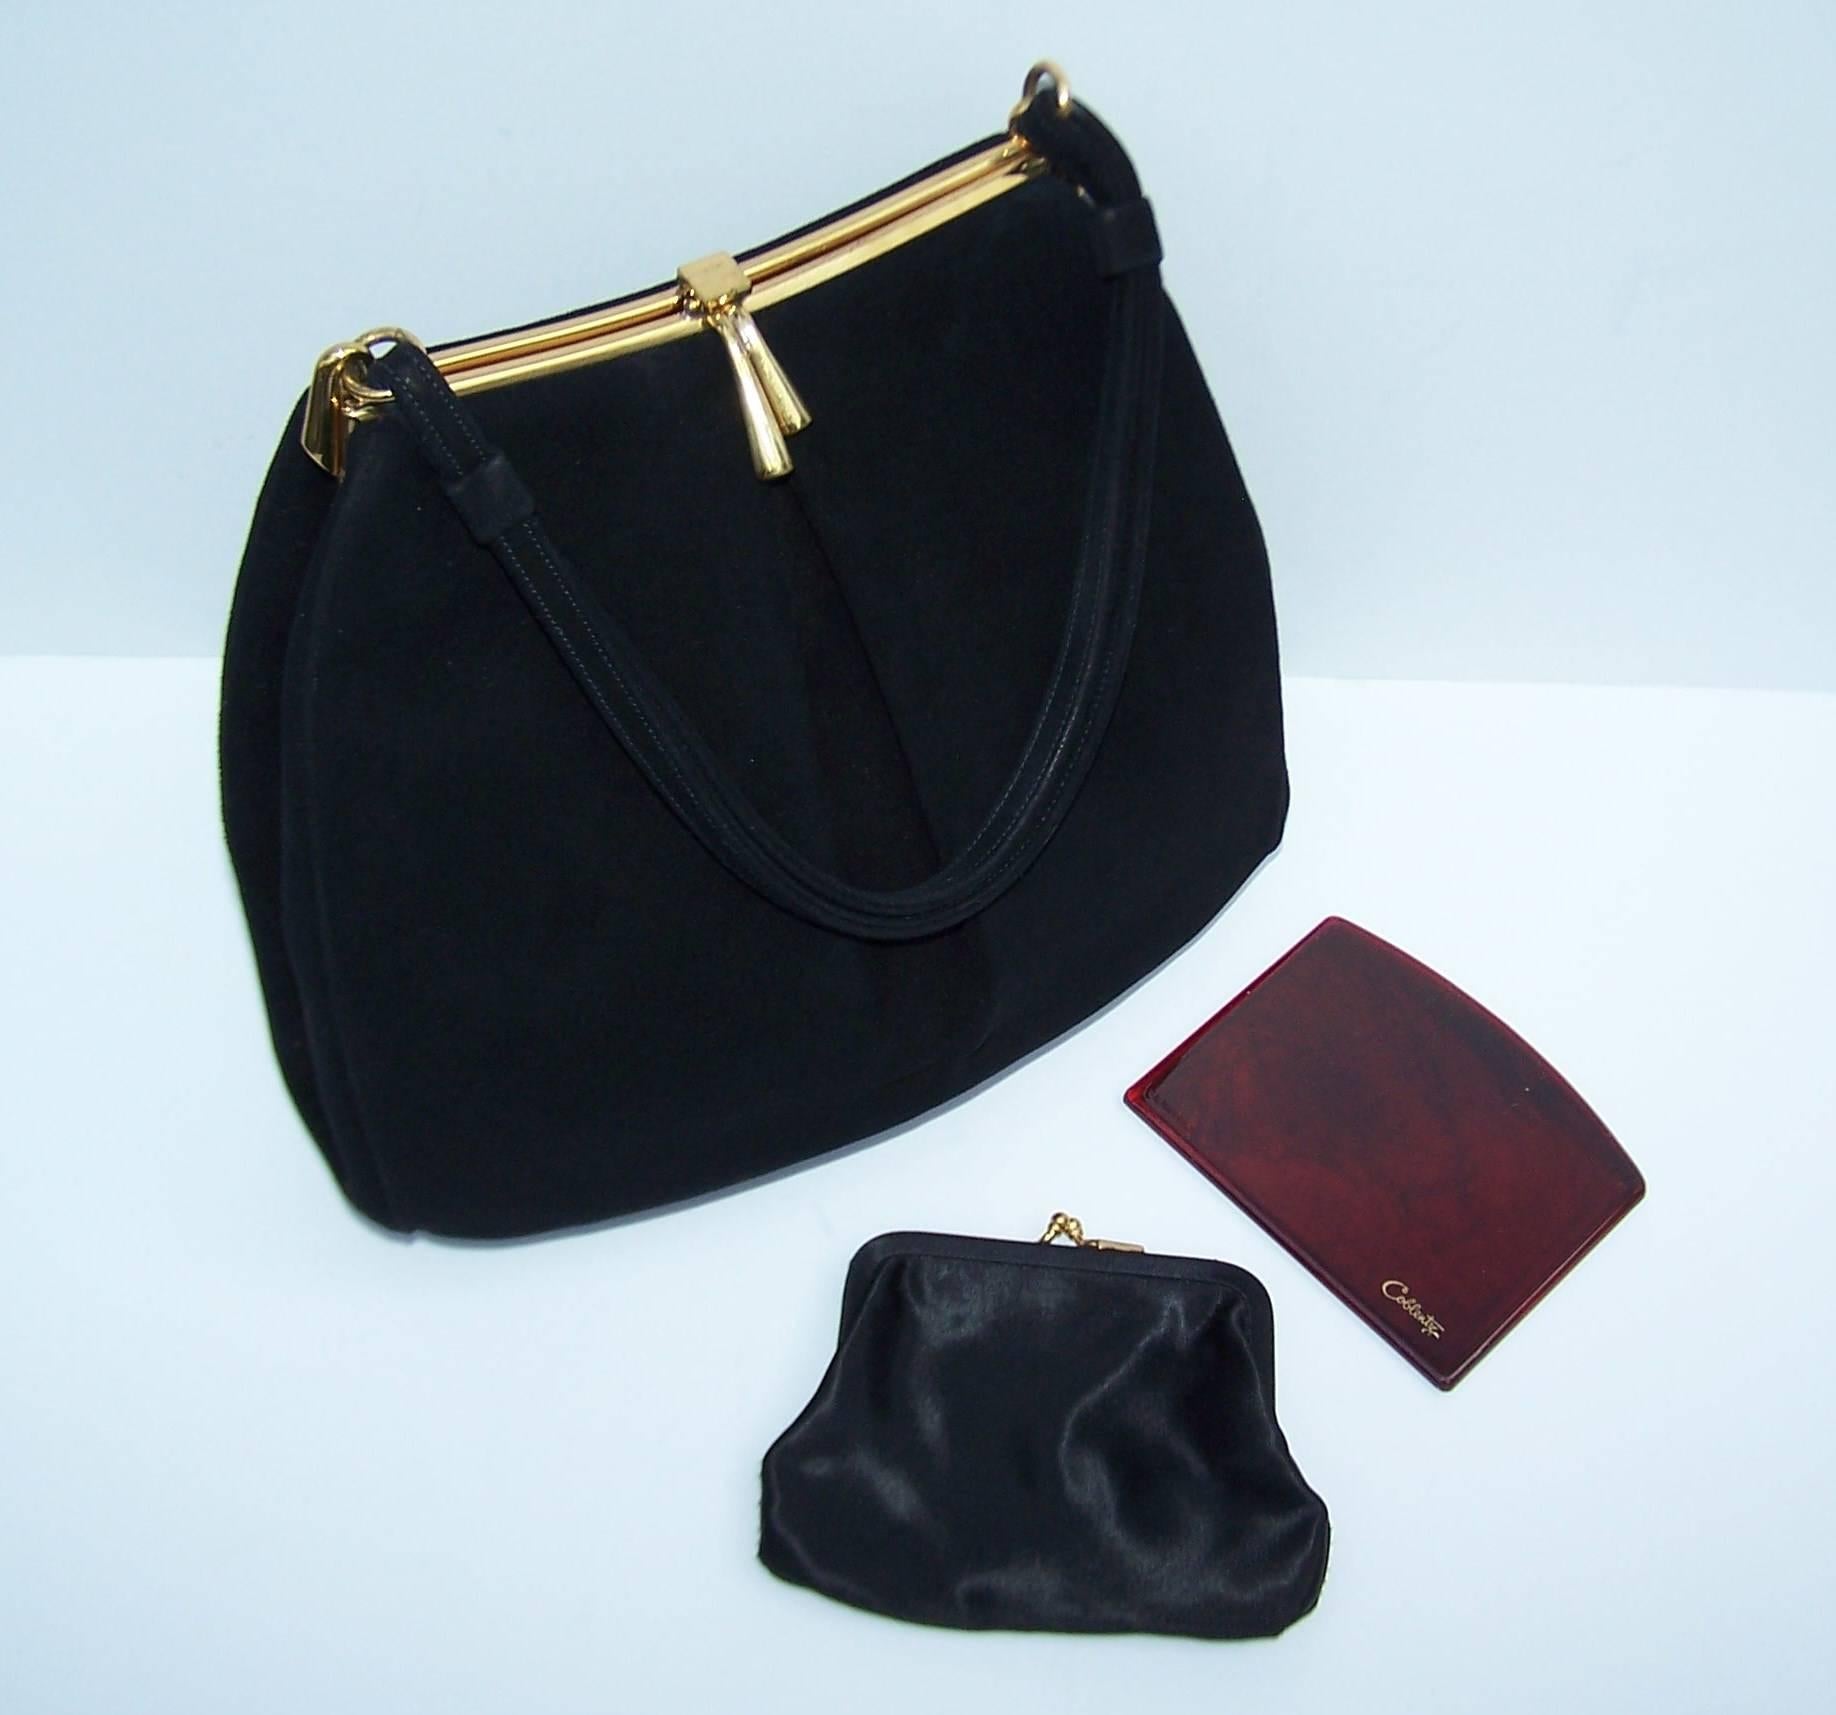 This 1950's Coblentz handbag has all the charm of a vintage design with a roomy interior that functions well for modern day 'accoutrements'.  In other words, there is room for your stuff!  The black suede body and gold metal frame can function as a